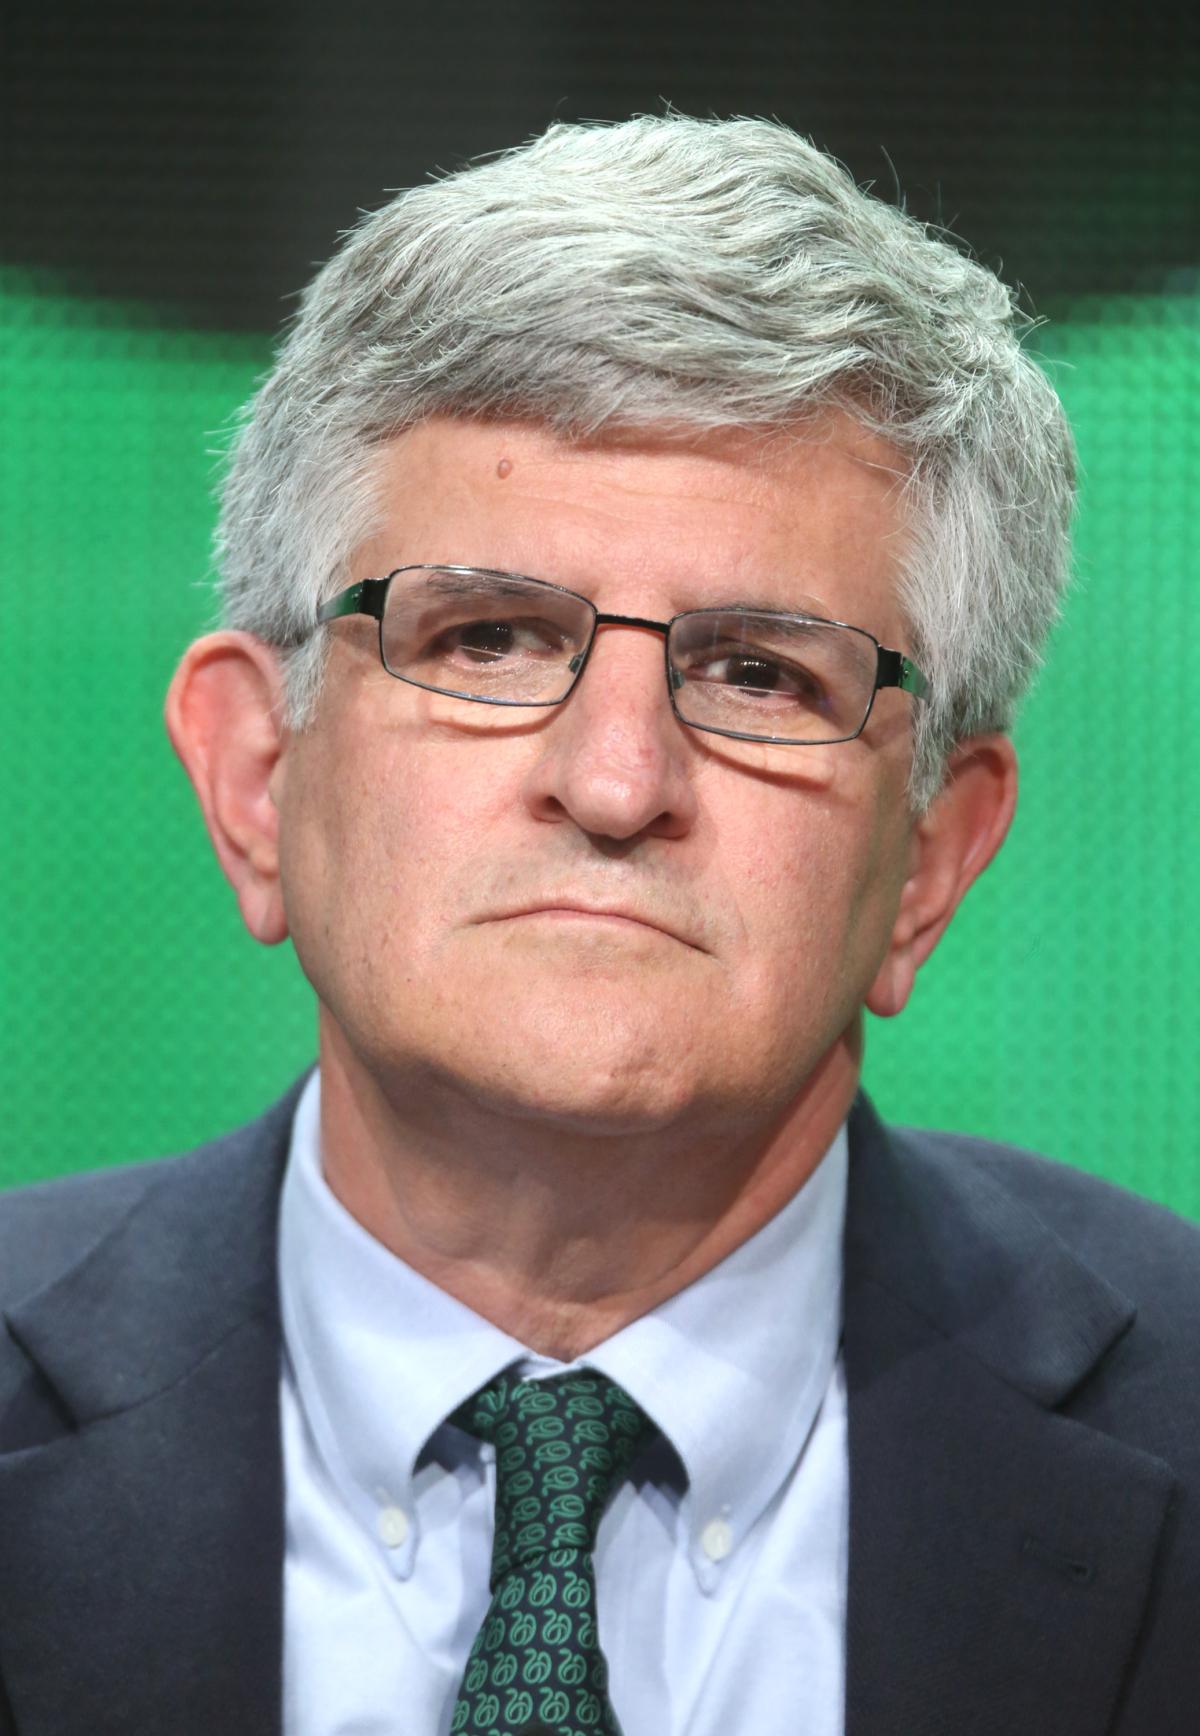 Dr. Paul Offit in Beverly Hills, Calif., on July 23, 2014. (Frederick M. Brown/Getty Images)